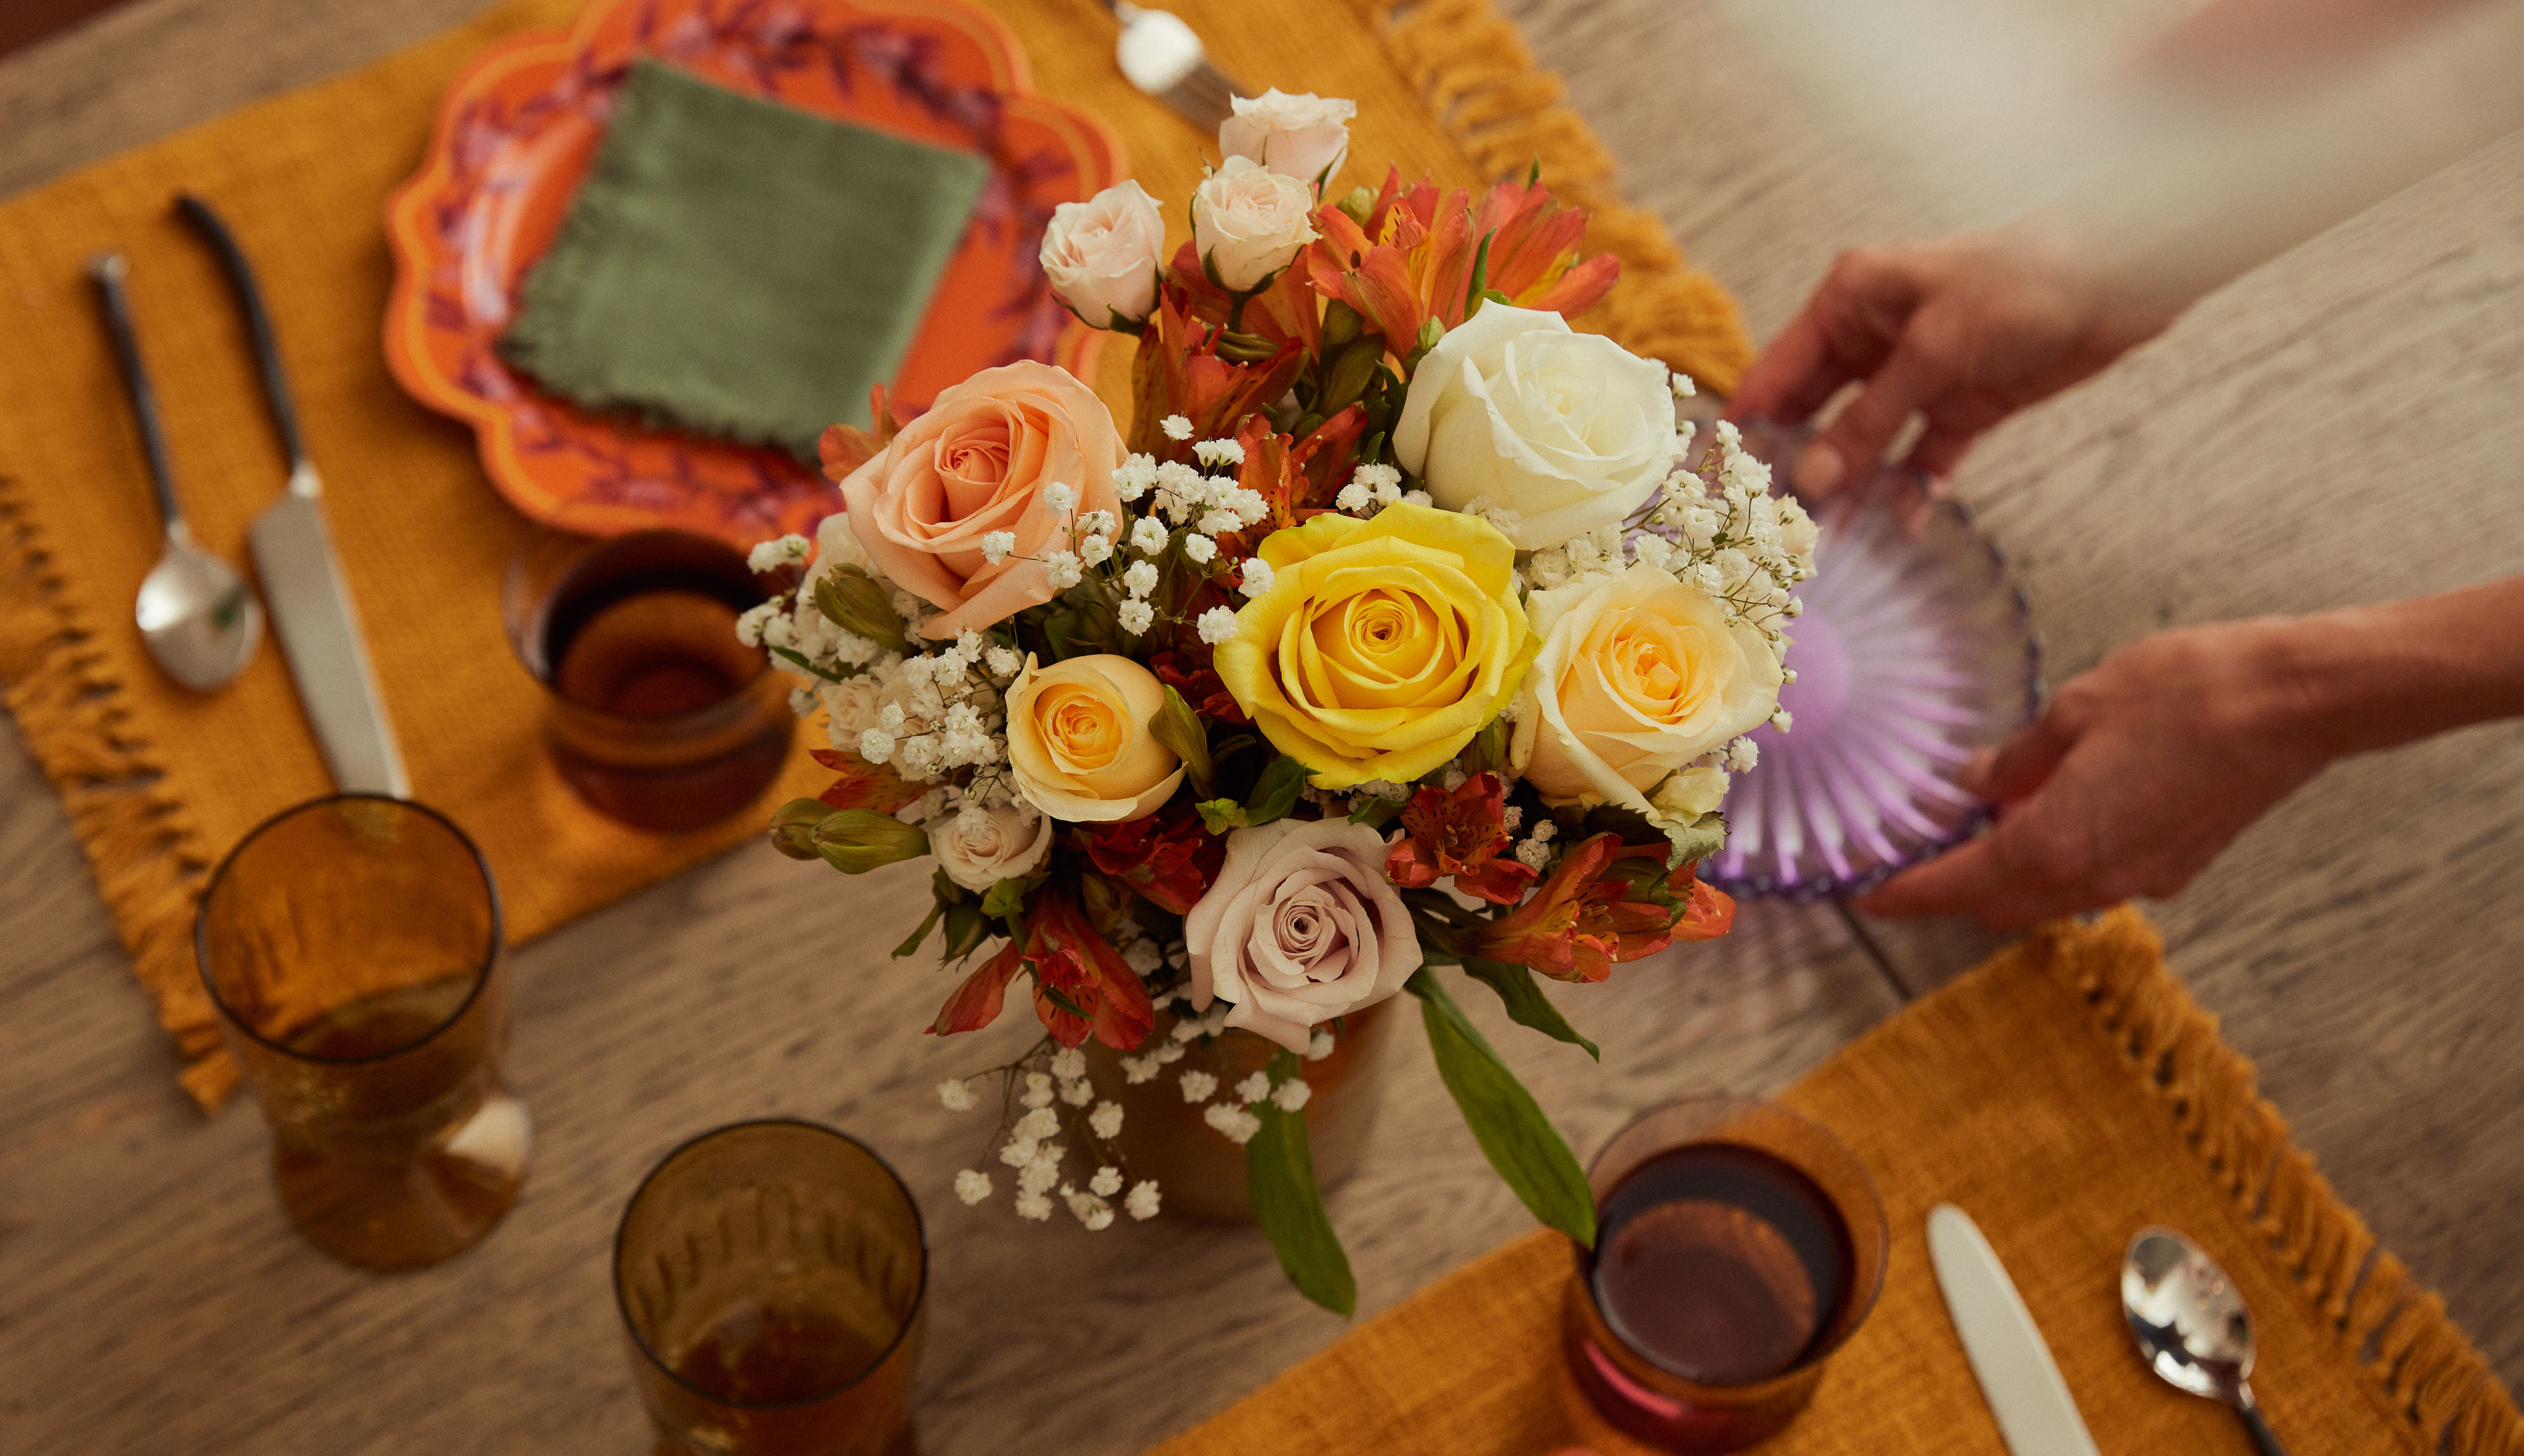 A table set for Thanksgiving 2022 with a floral centerpiece